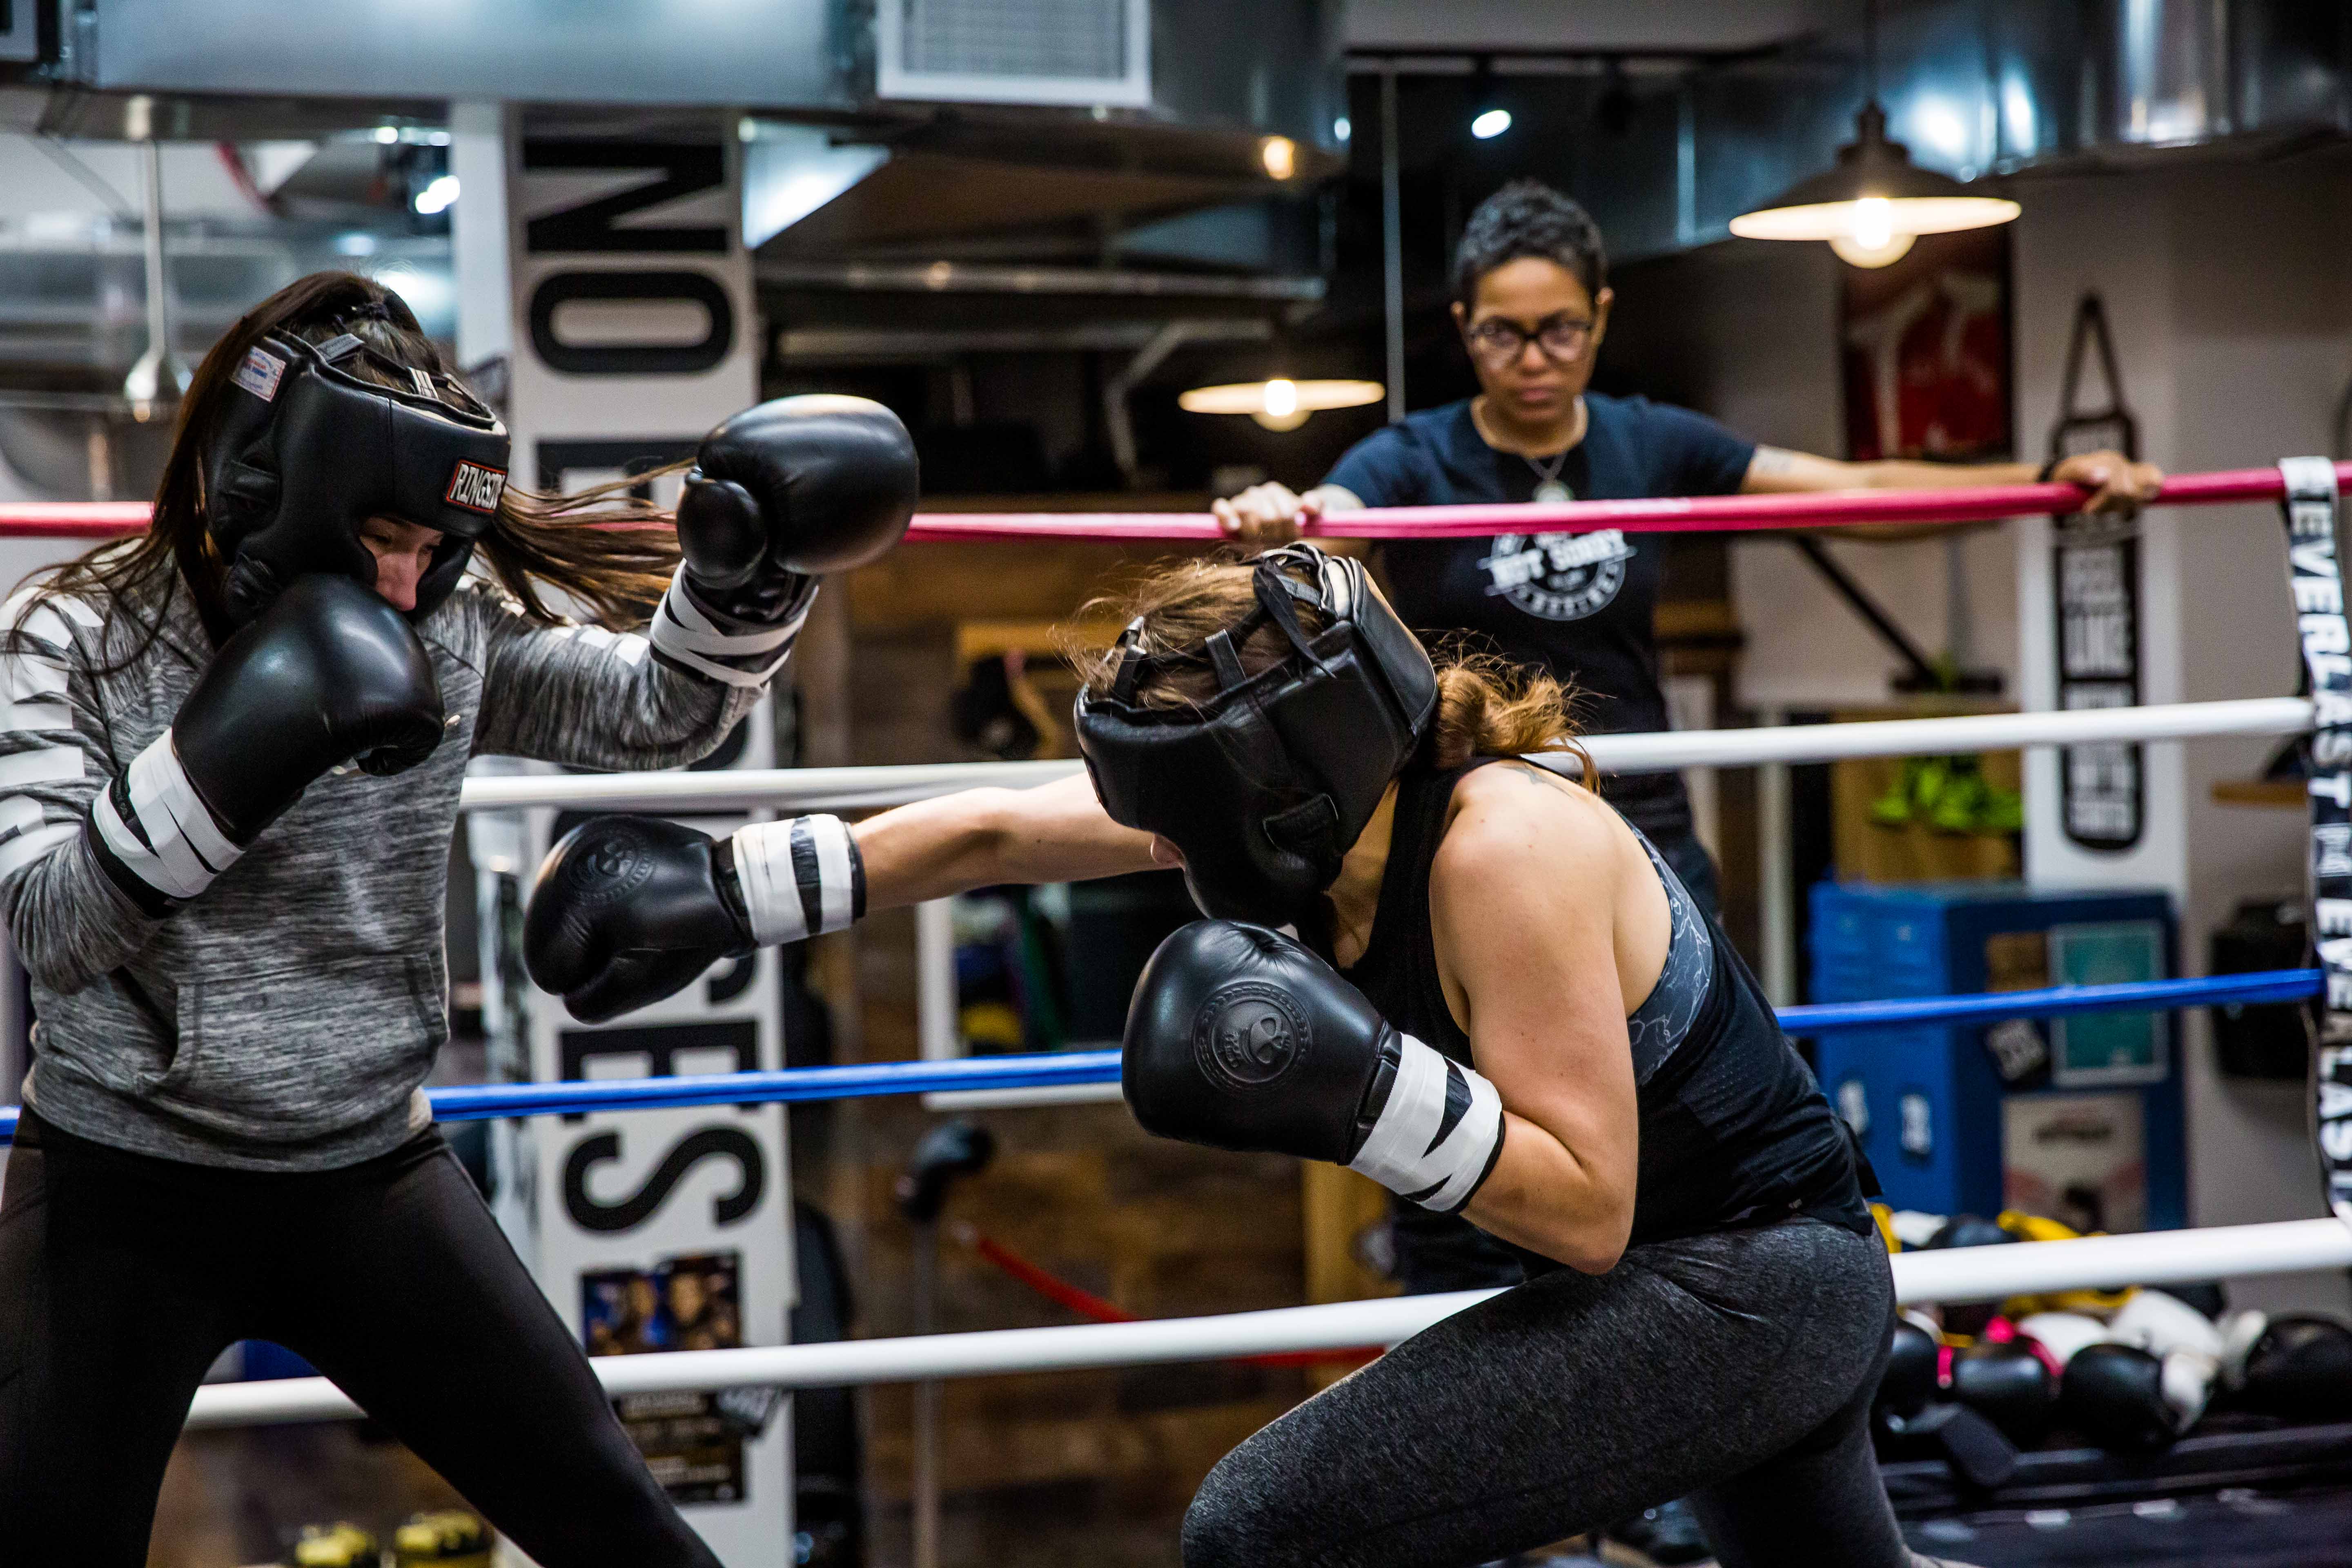 Women's World of Boxing Covid-19 Relief Fight | IFundWomen